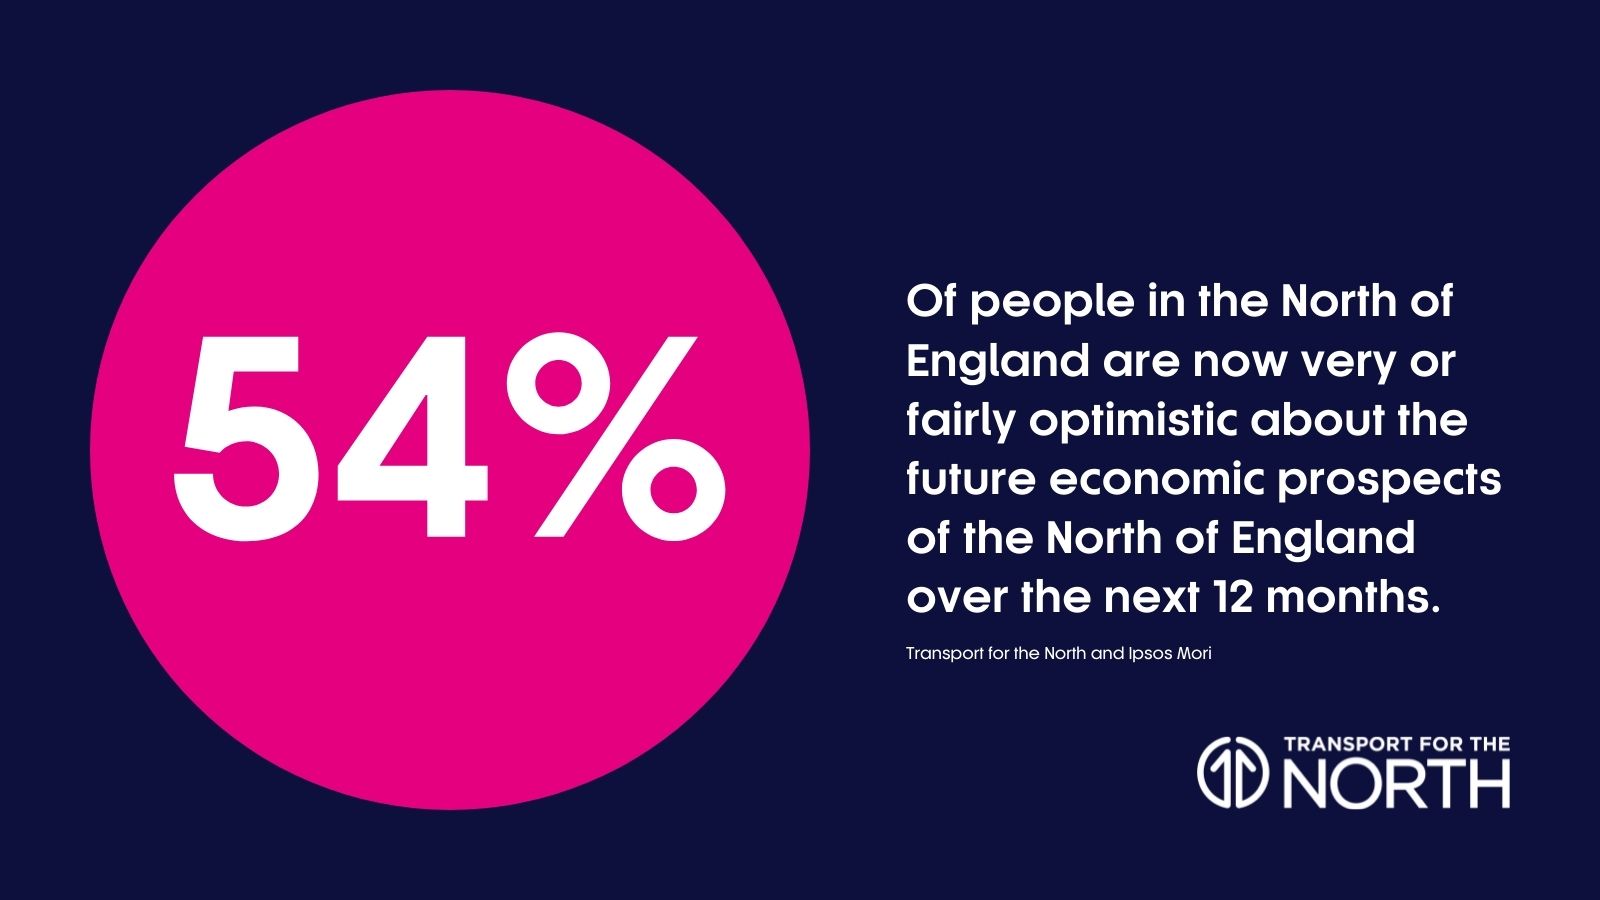 Polling on future economic prospects for the North of England